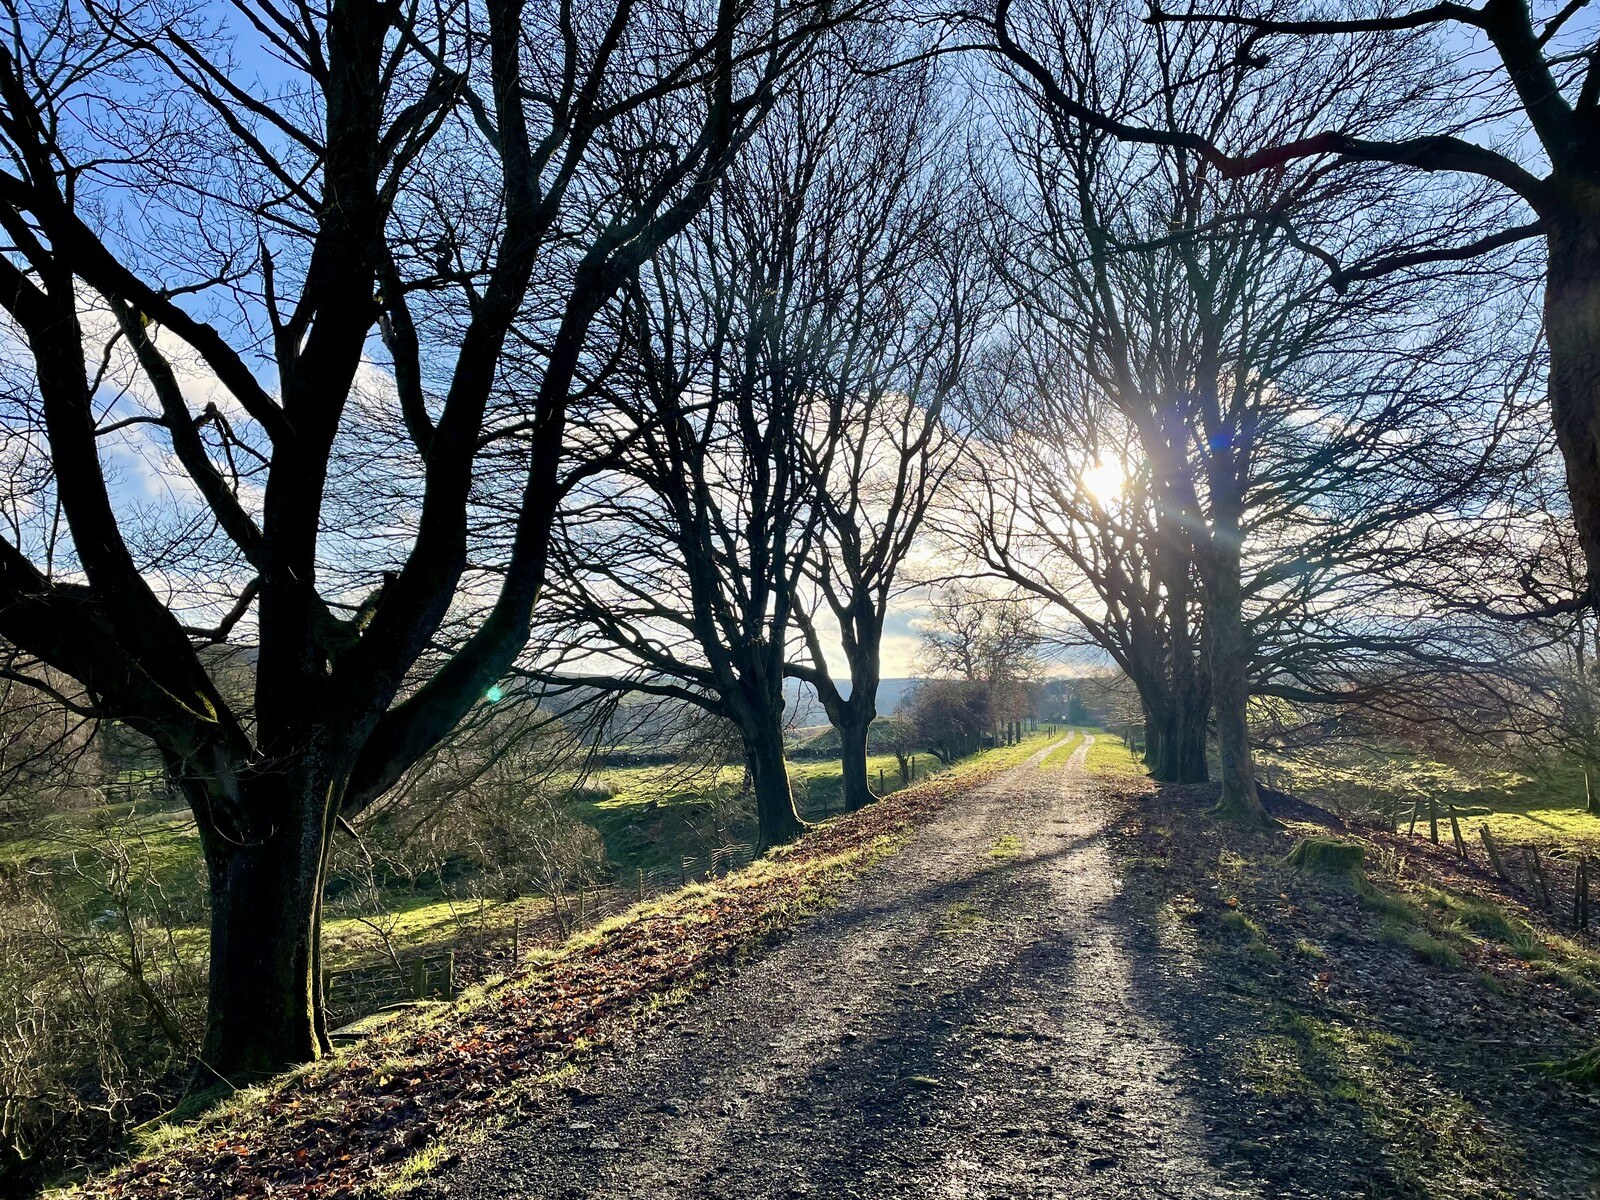 Sun shining through trees on the old Whitby & Pickering railway path, just before Sadler House